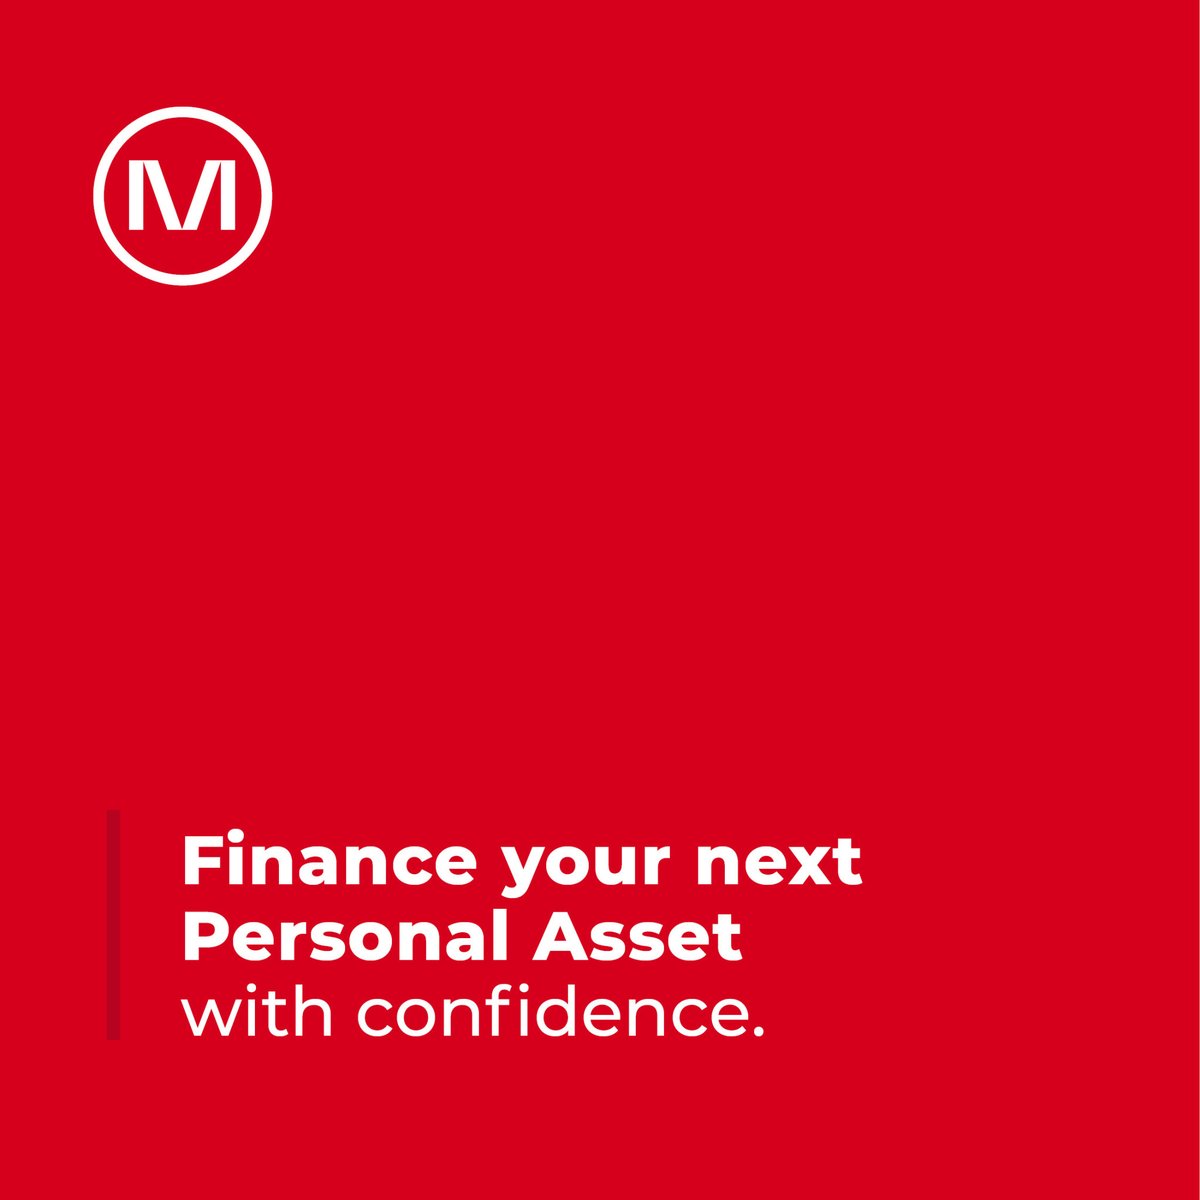 Our friendly team are here to find a financial solution for you. 

Give us a call today on 1300 4 MORRIS to get started. 

#MorrisPersonal #PersonalFinance #AssetFinance #SuccessTogether